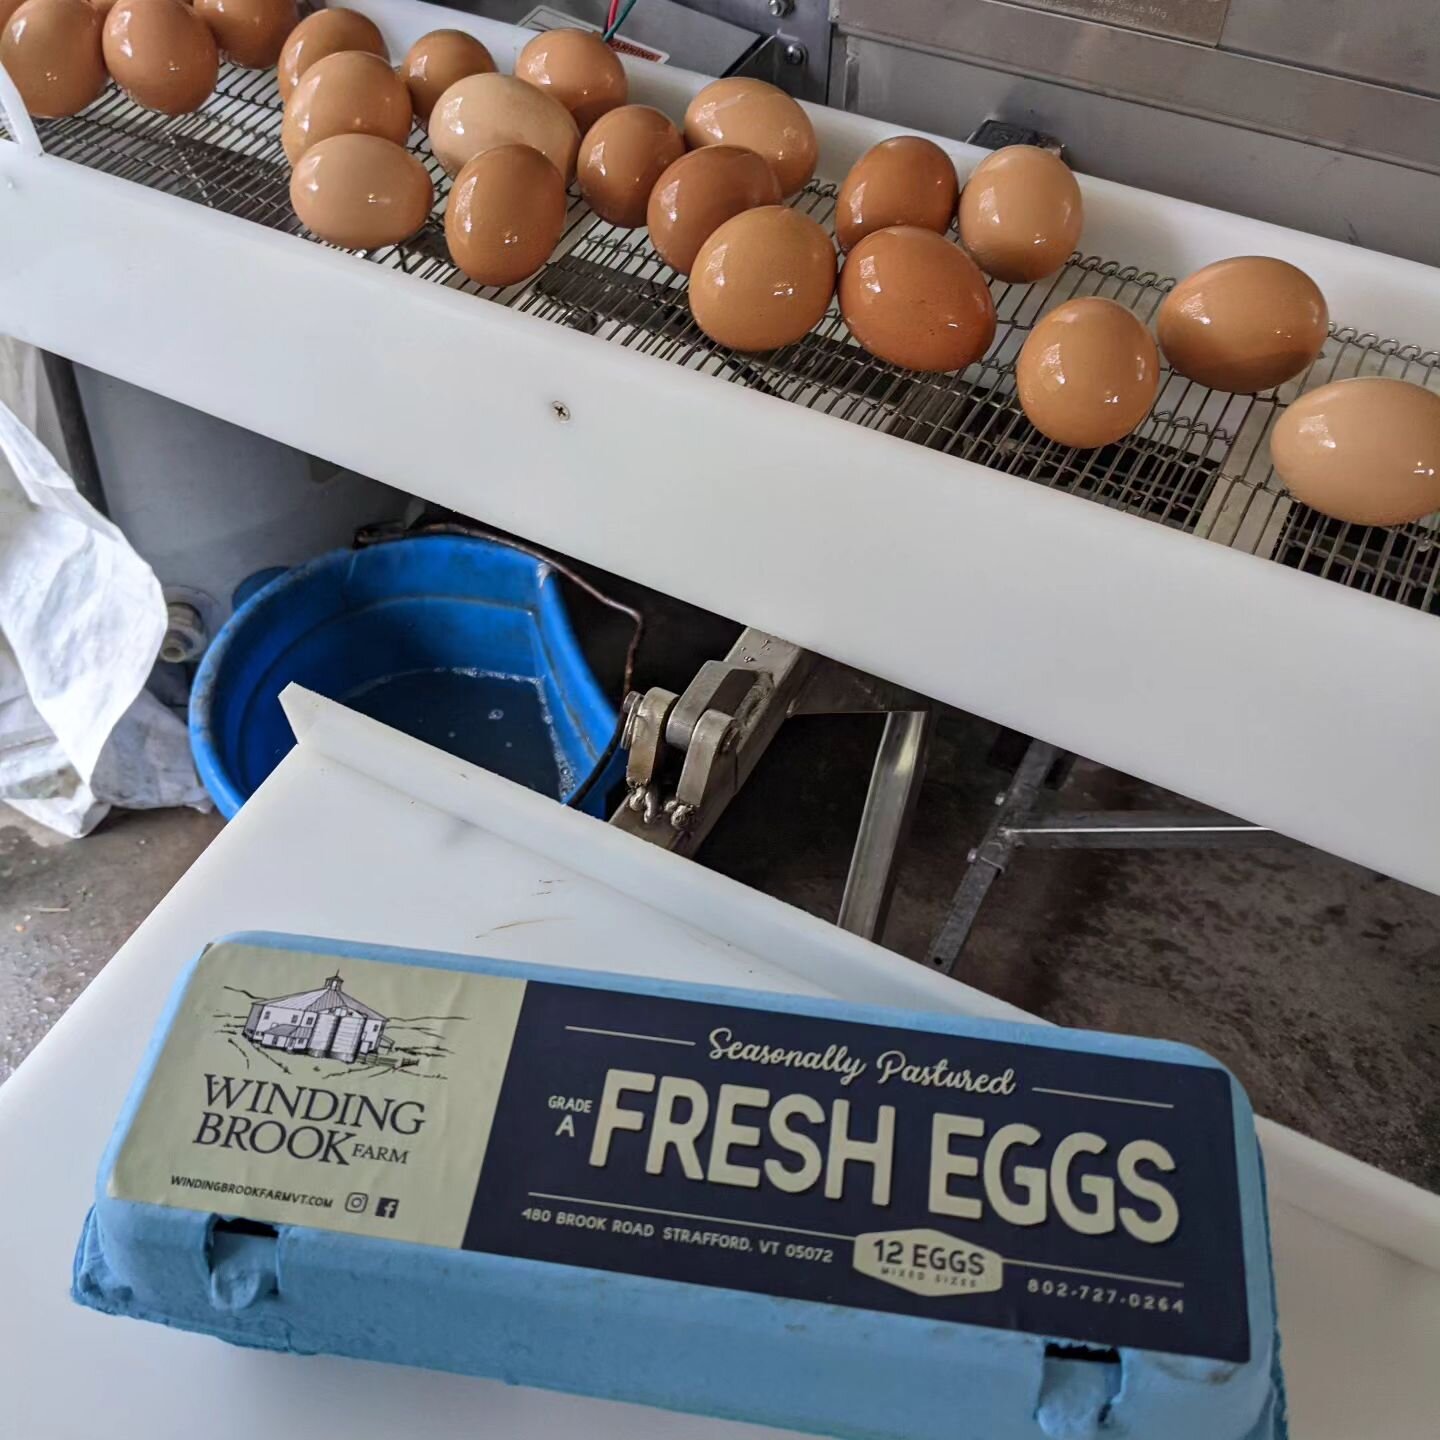 Please return our blue egg cartons to us if you can. We are glad to reuse them! 

#pasturedpoultry 
#eggs 
#vermontbreakfast